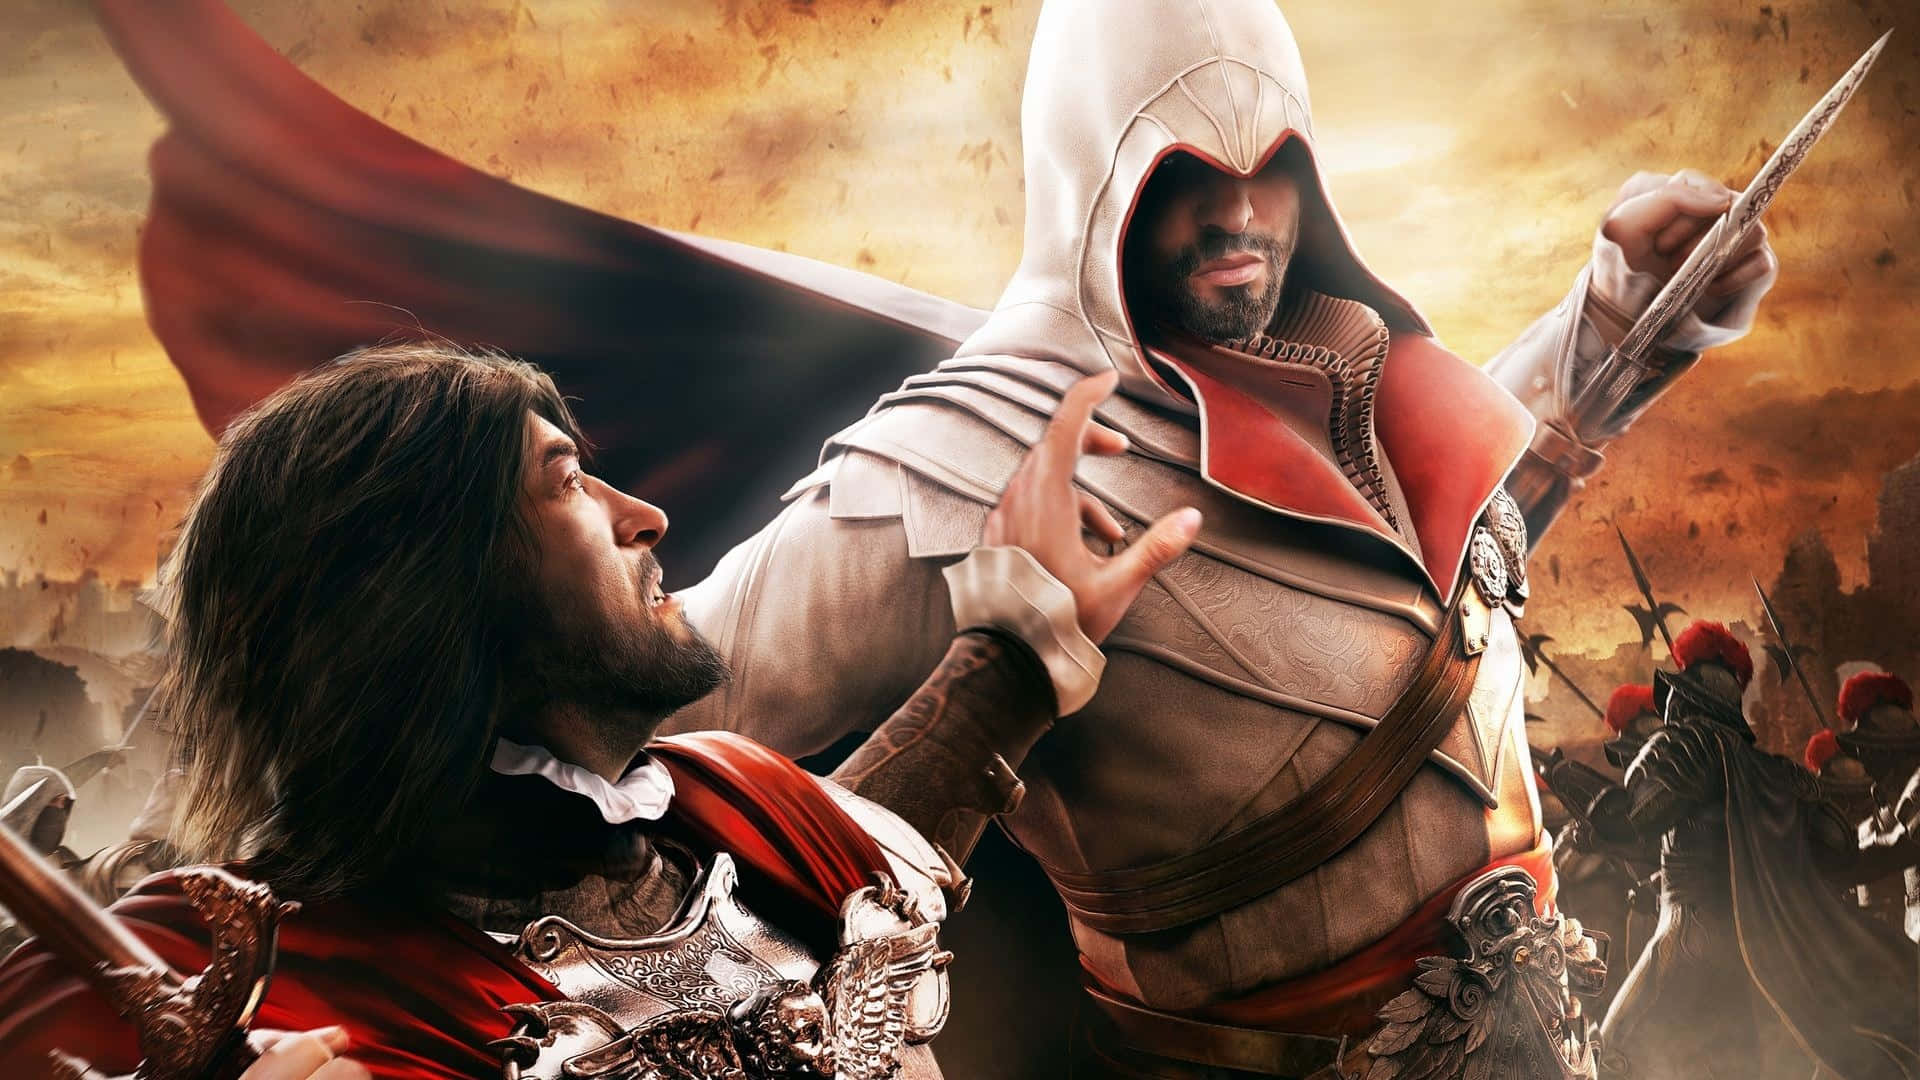 Epic Assassin's Creed Characters Lineup Wallpaper